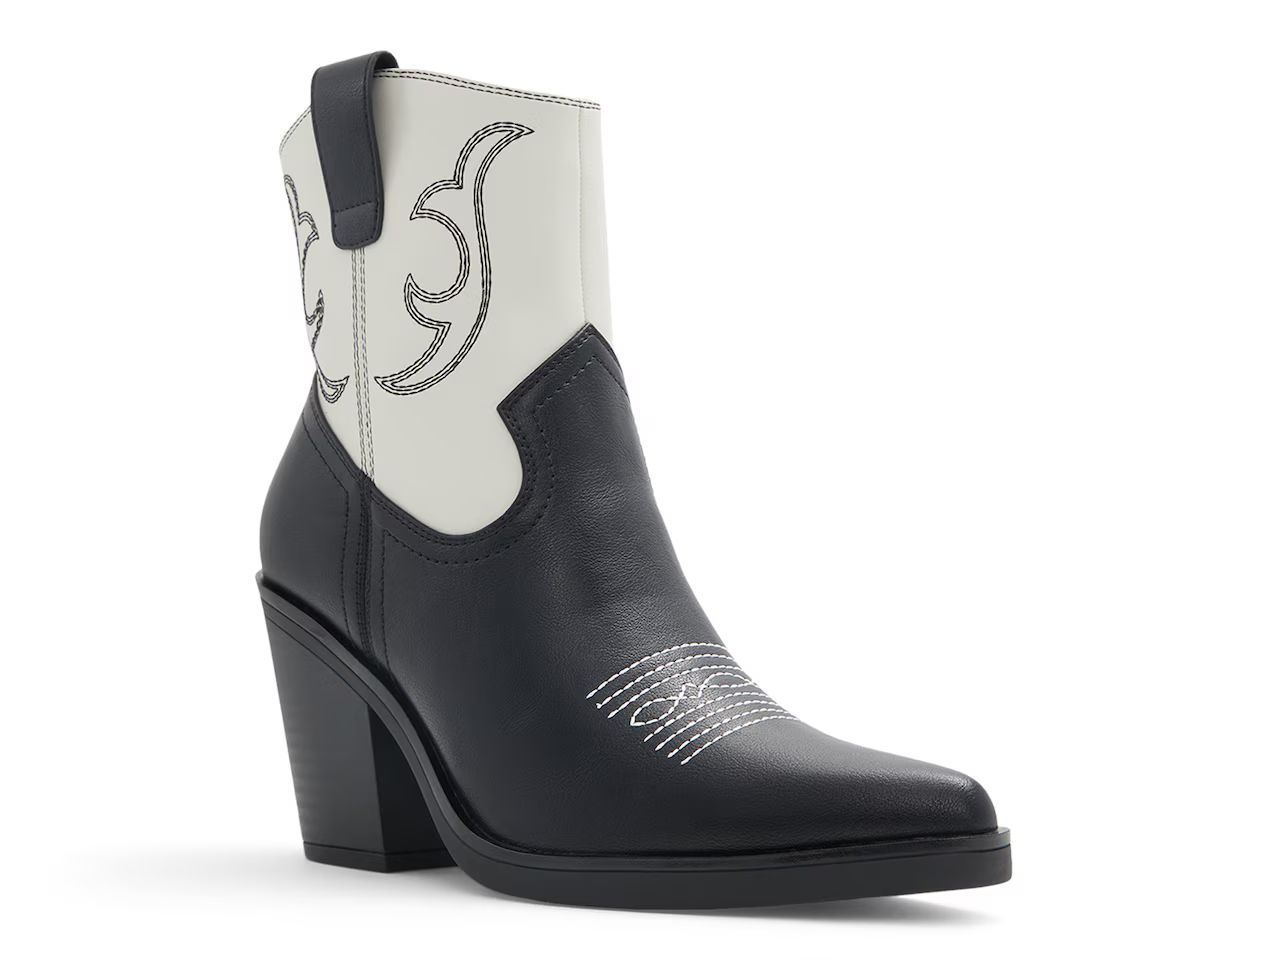 Call It Spring Wildwest Western Bootie | DSW